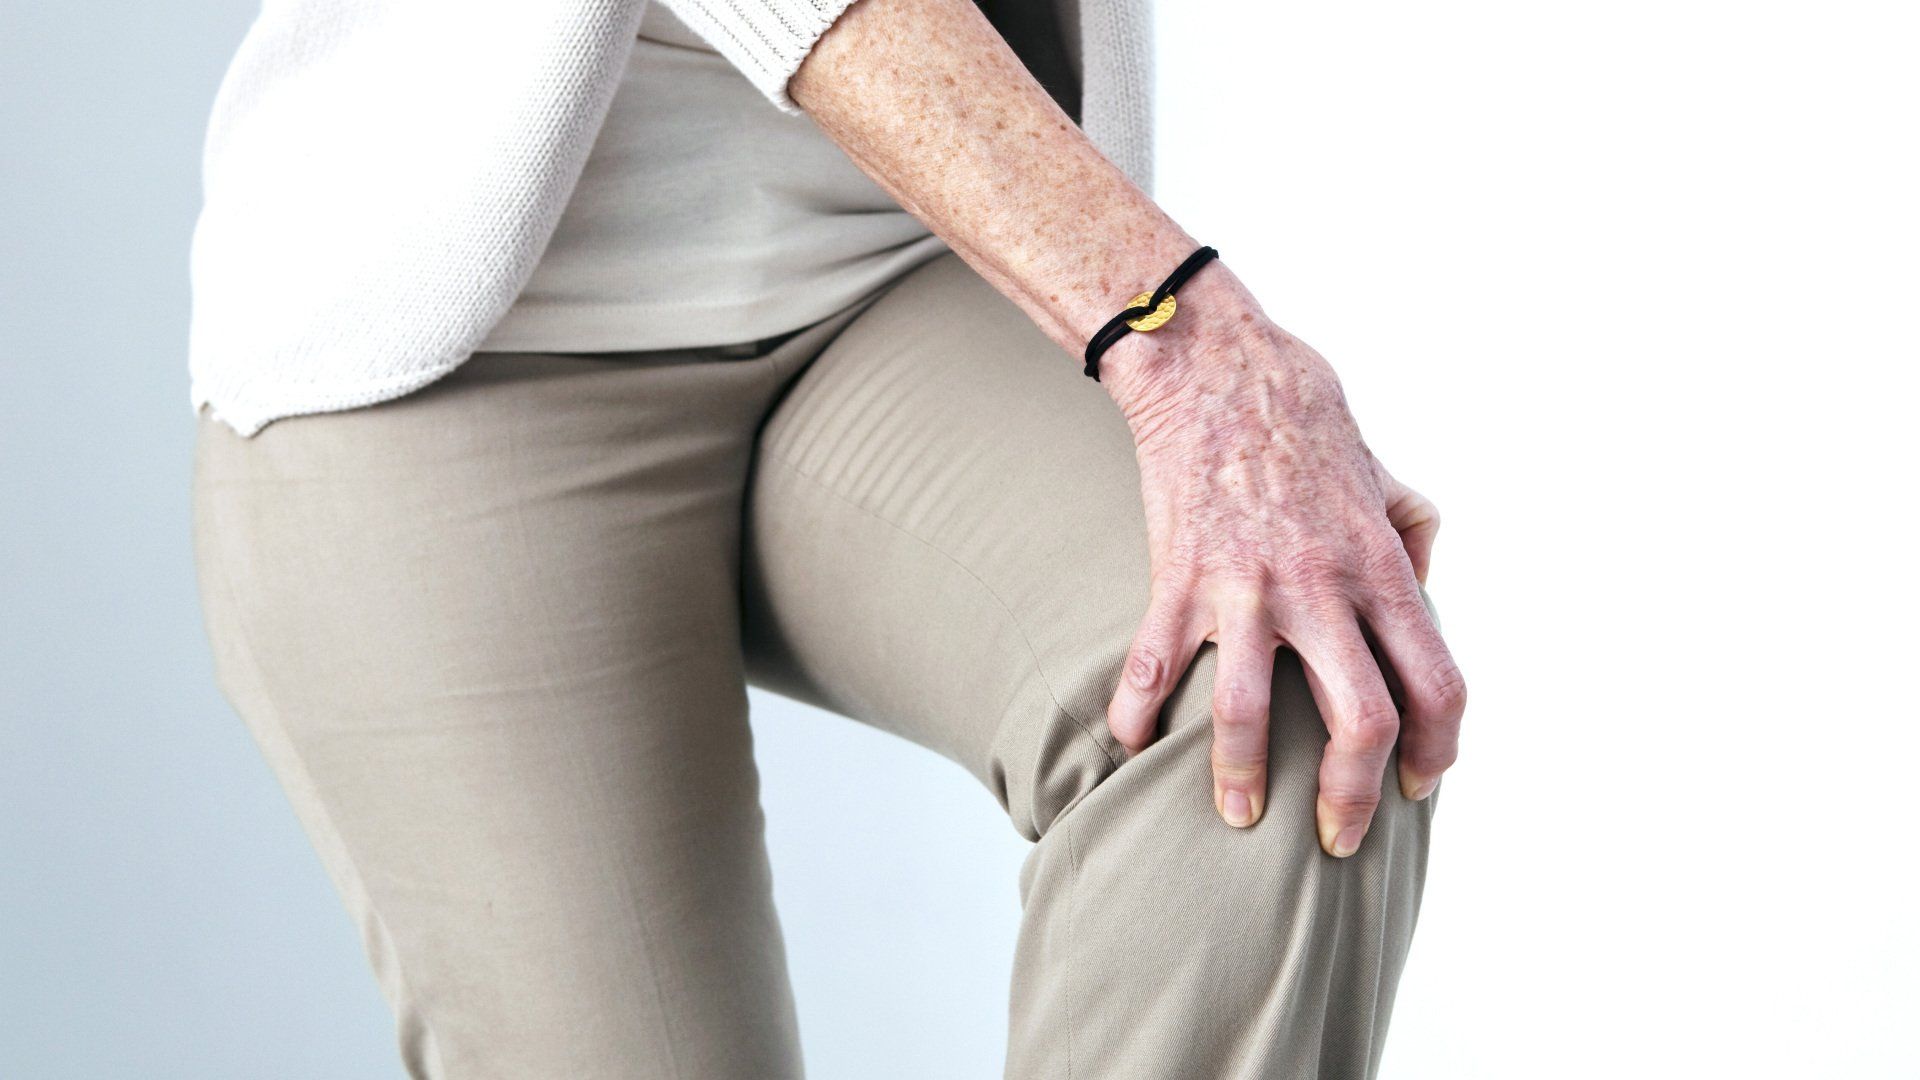 Knee Pain Treatment in Shelton, CT